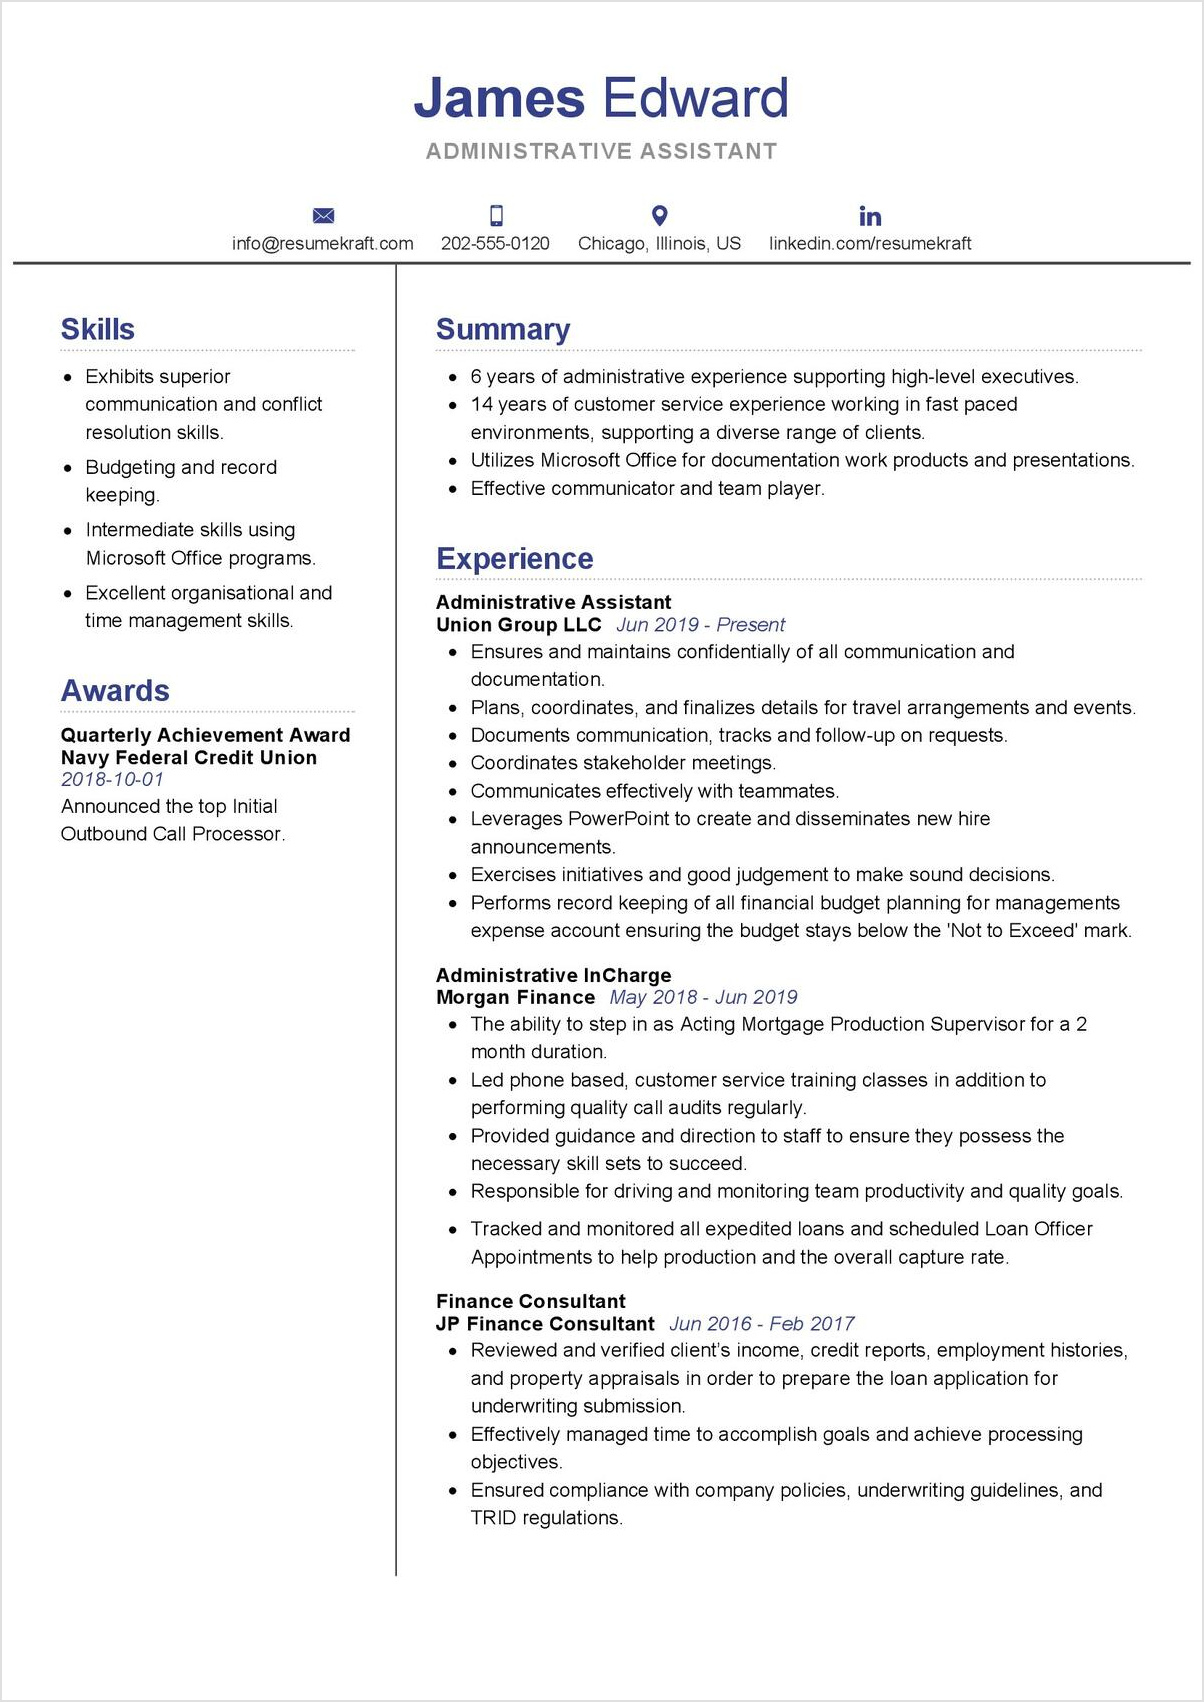 sample of resume template for administrative assistant